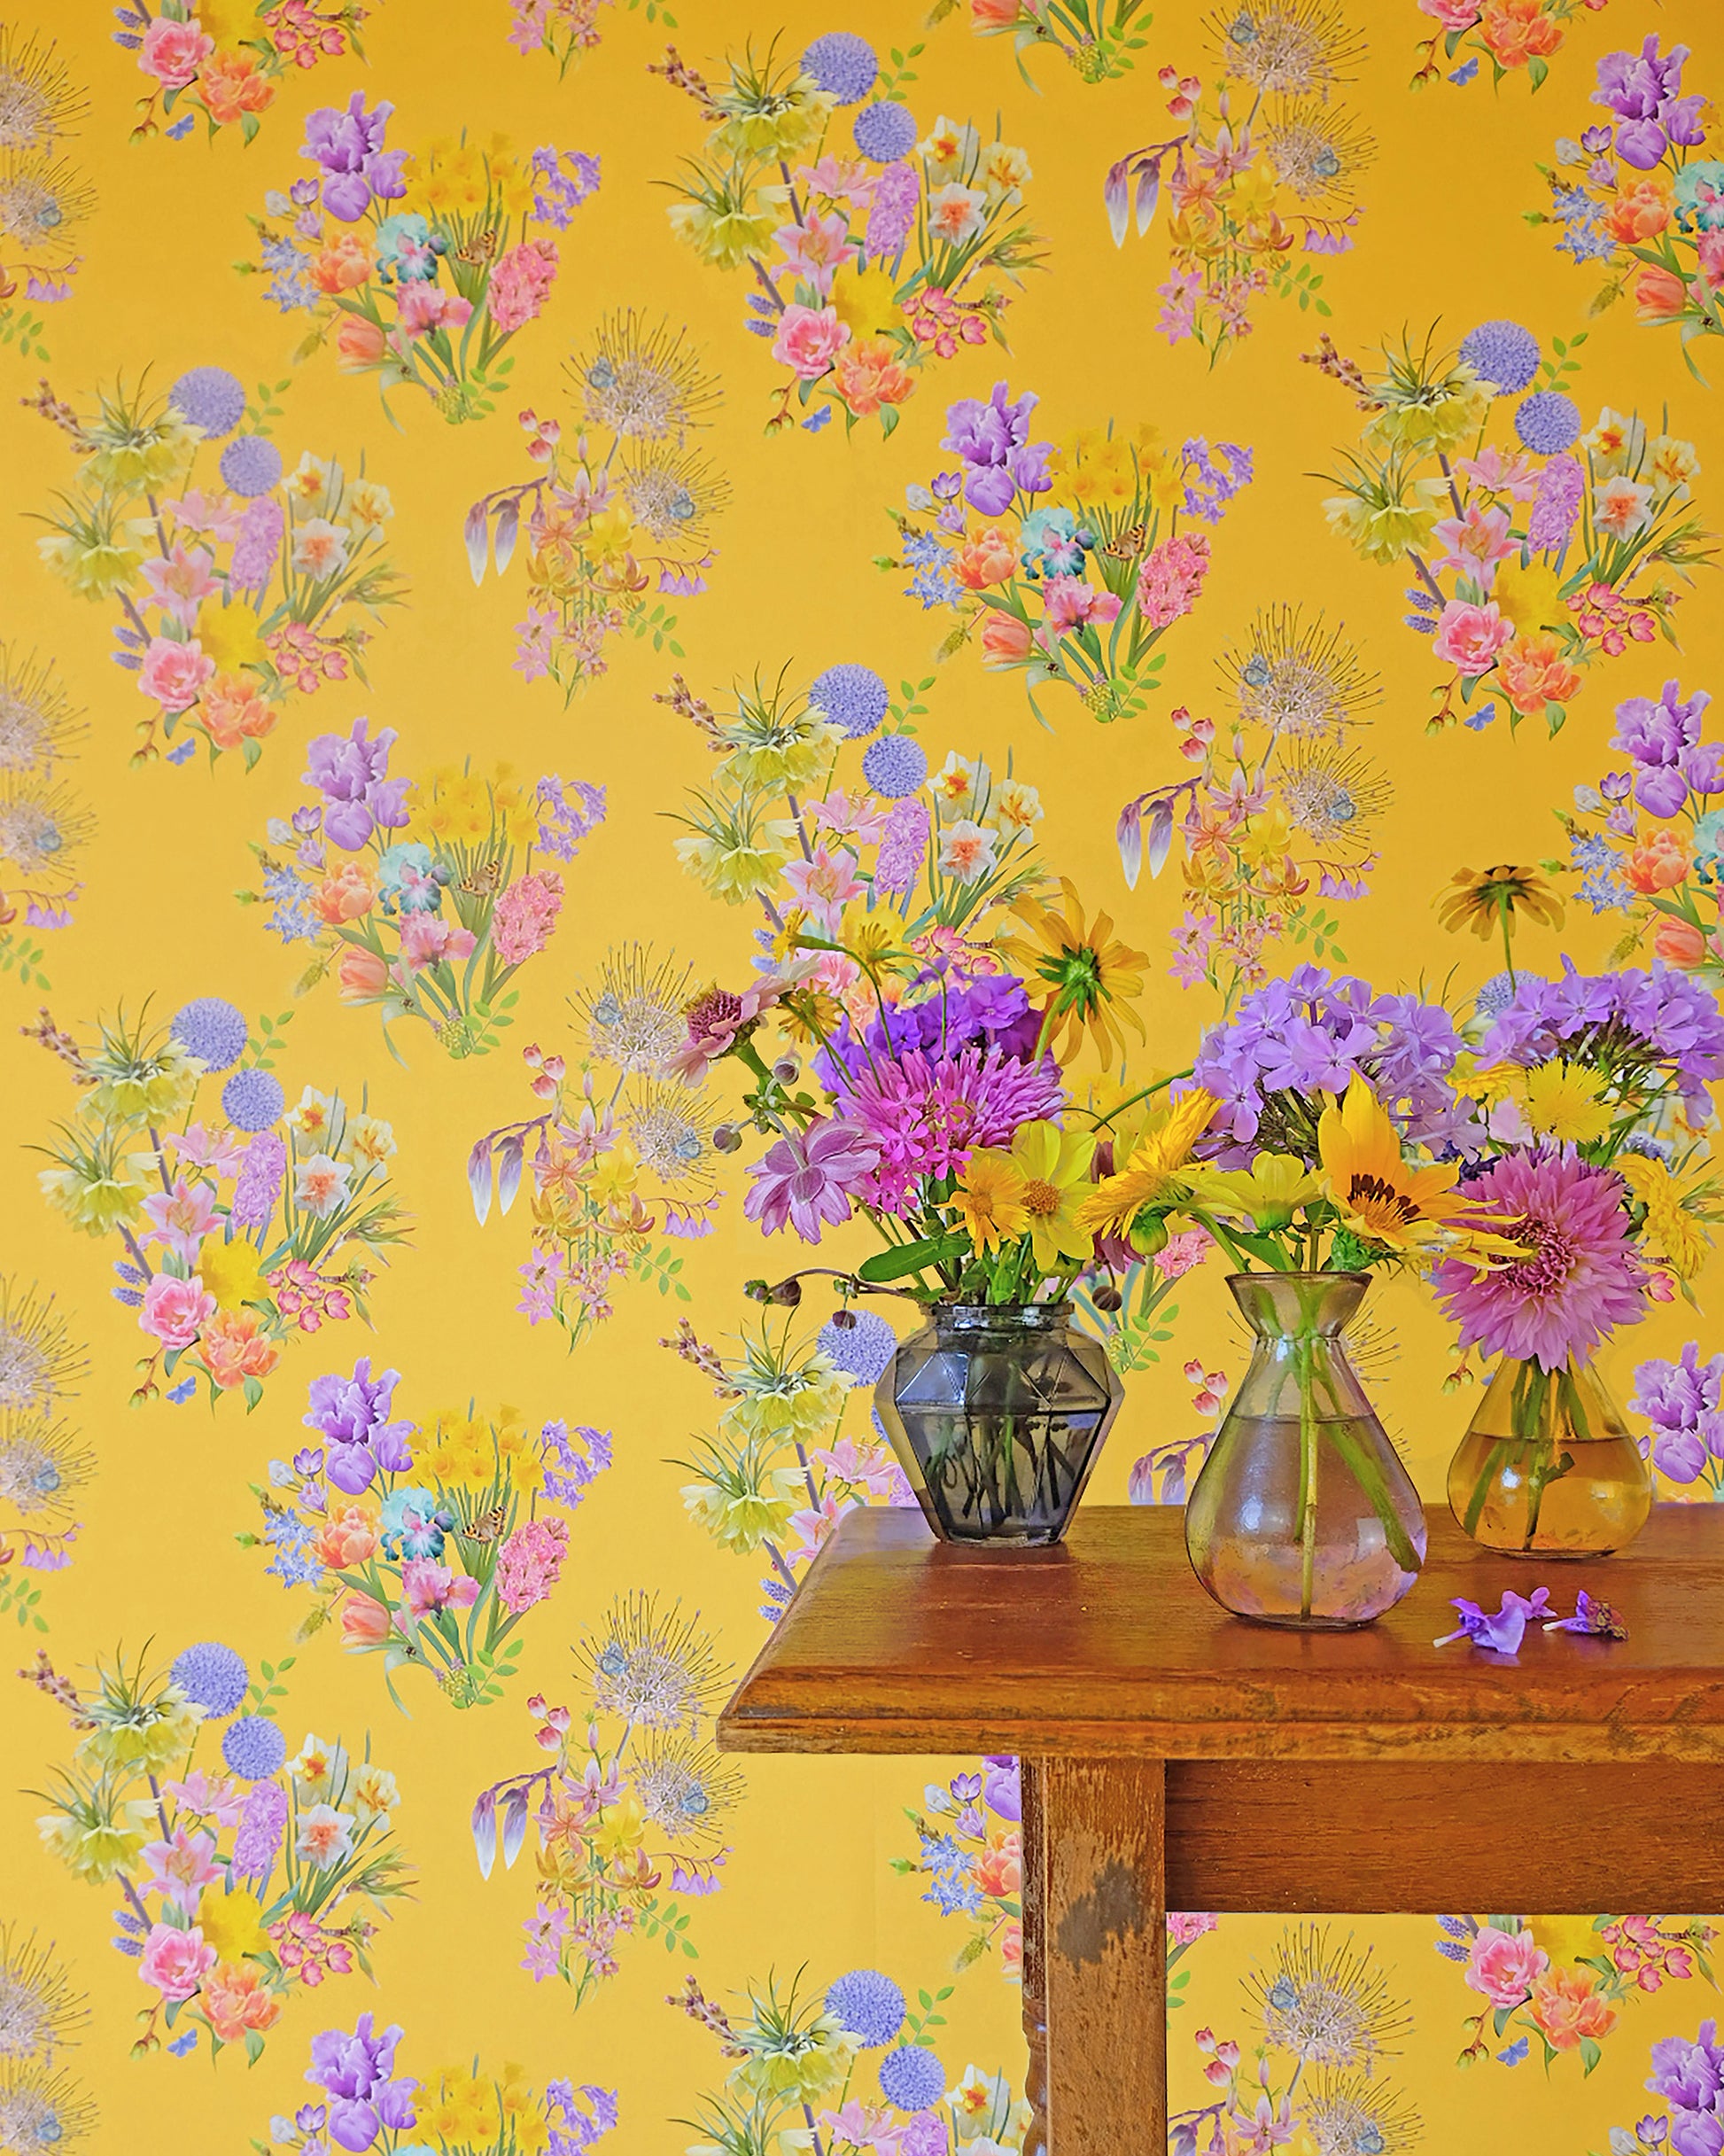 Colourful luxury wallpaper in sunshine yellow with a spring floral pattern for traditional cottage interiors